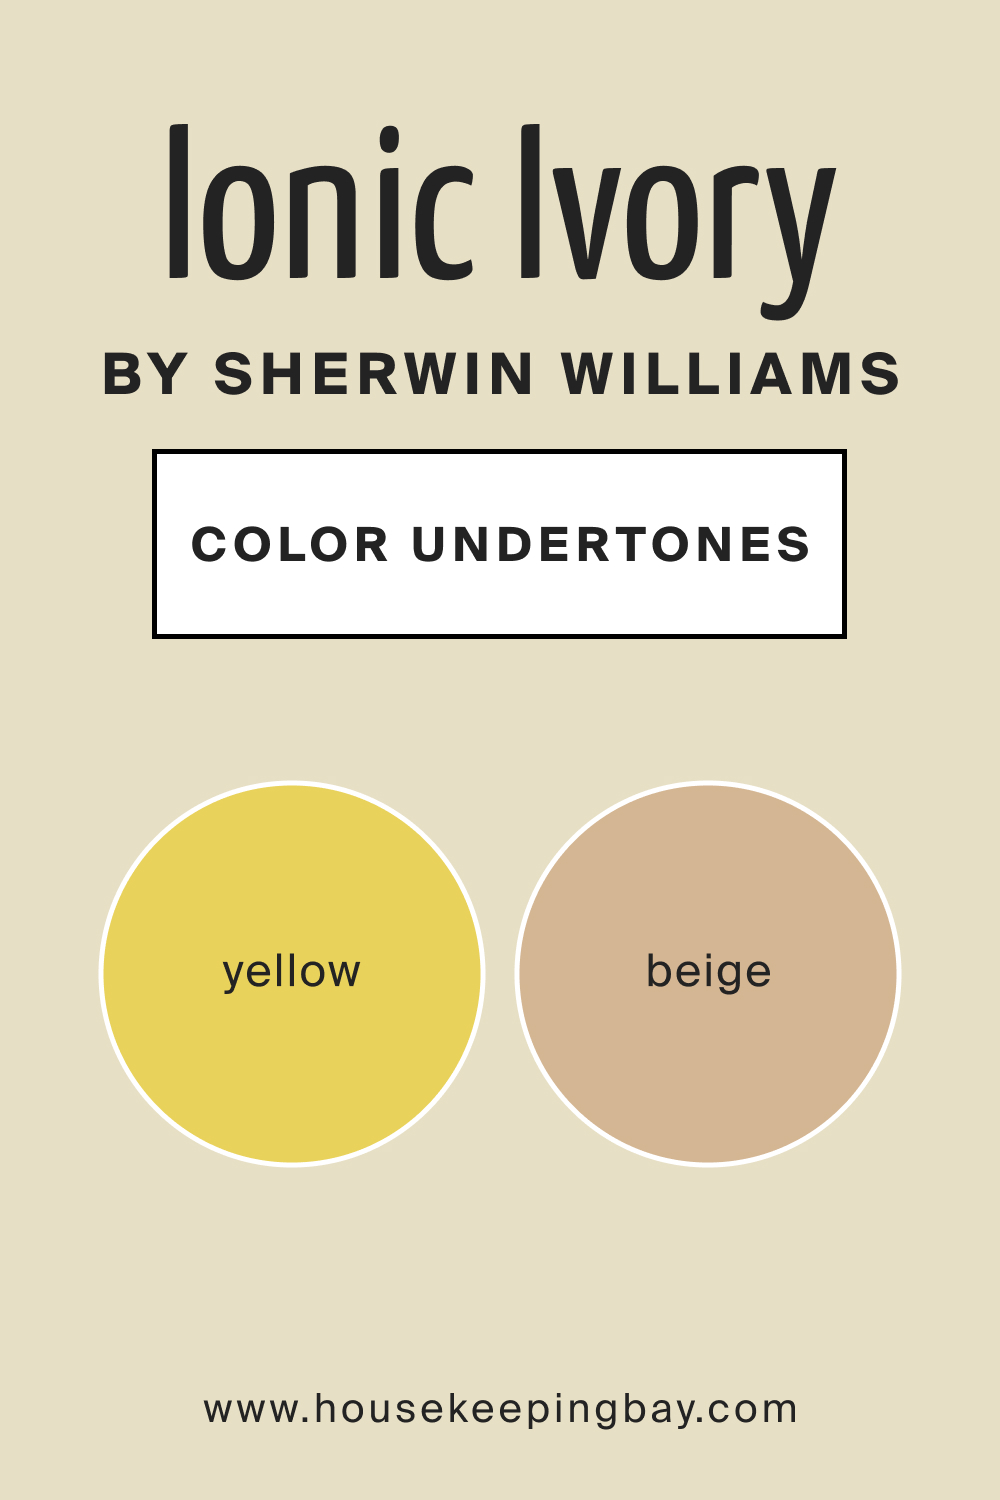 SW 6406 Ionic Ivory by Sherwin Williams Color Undertone